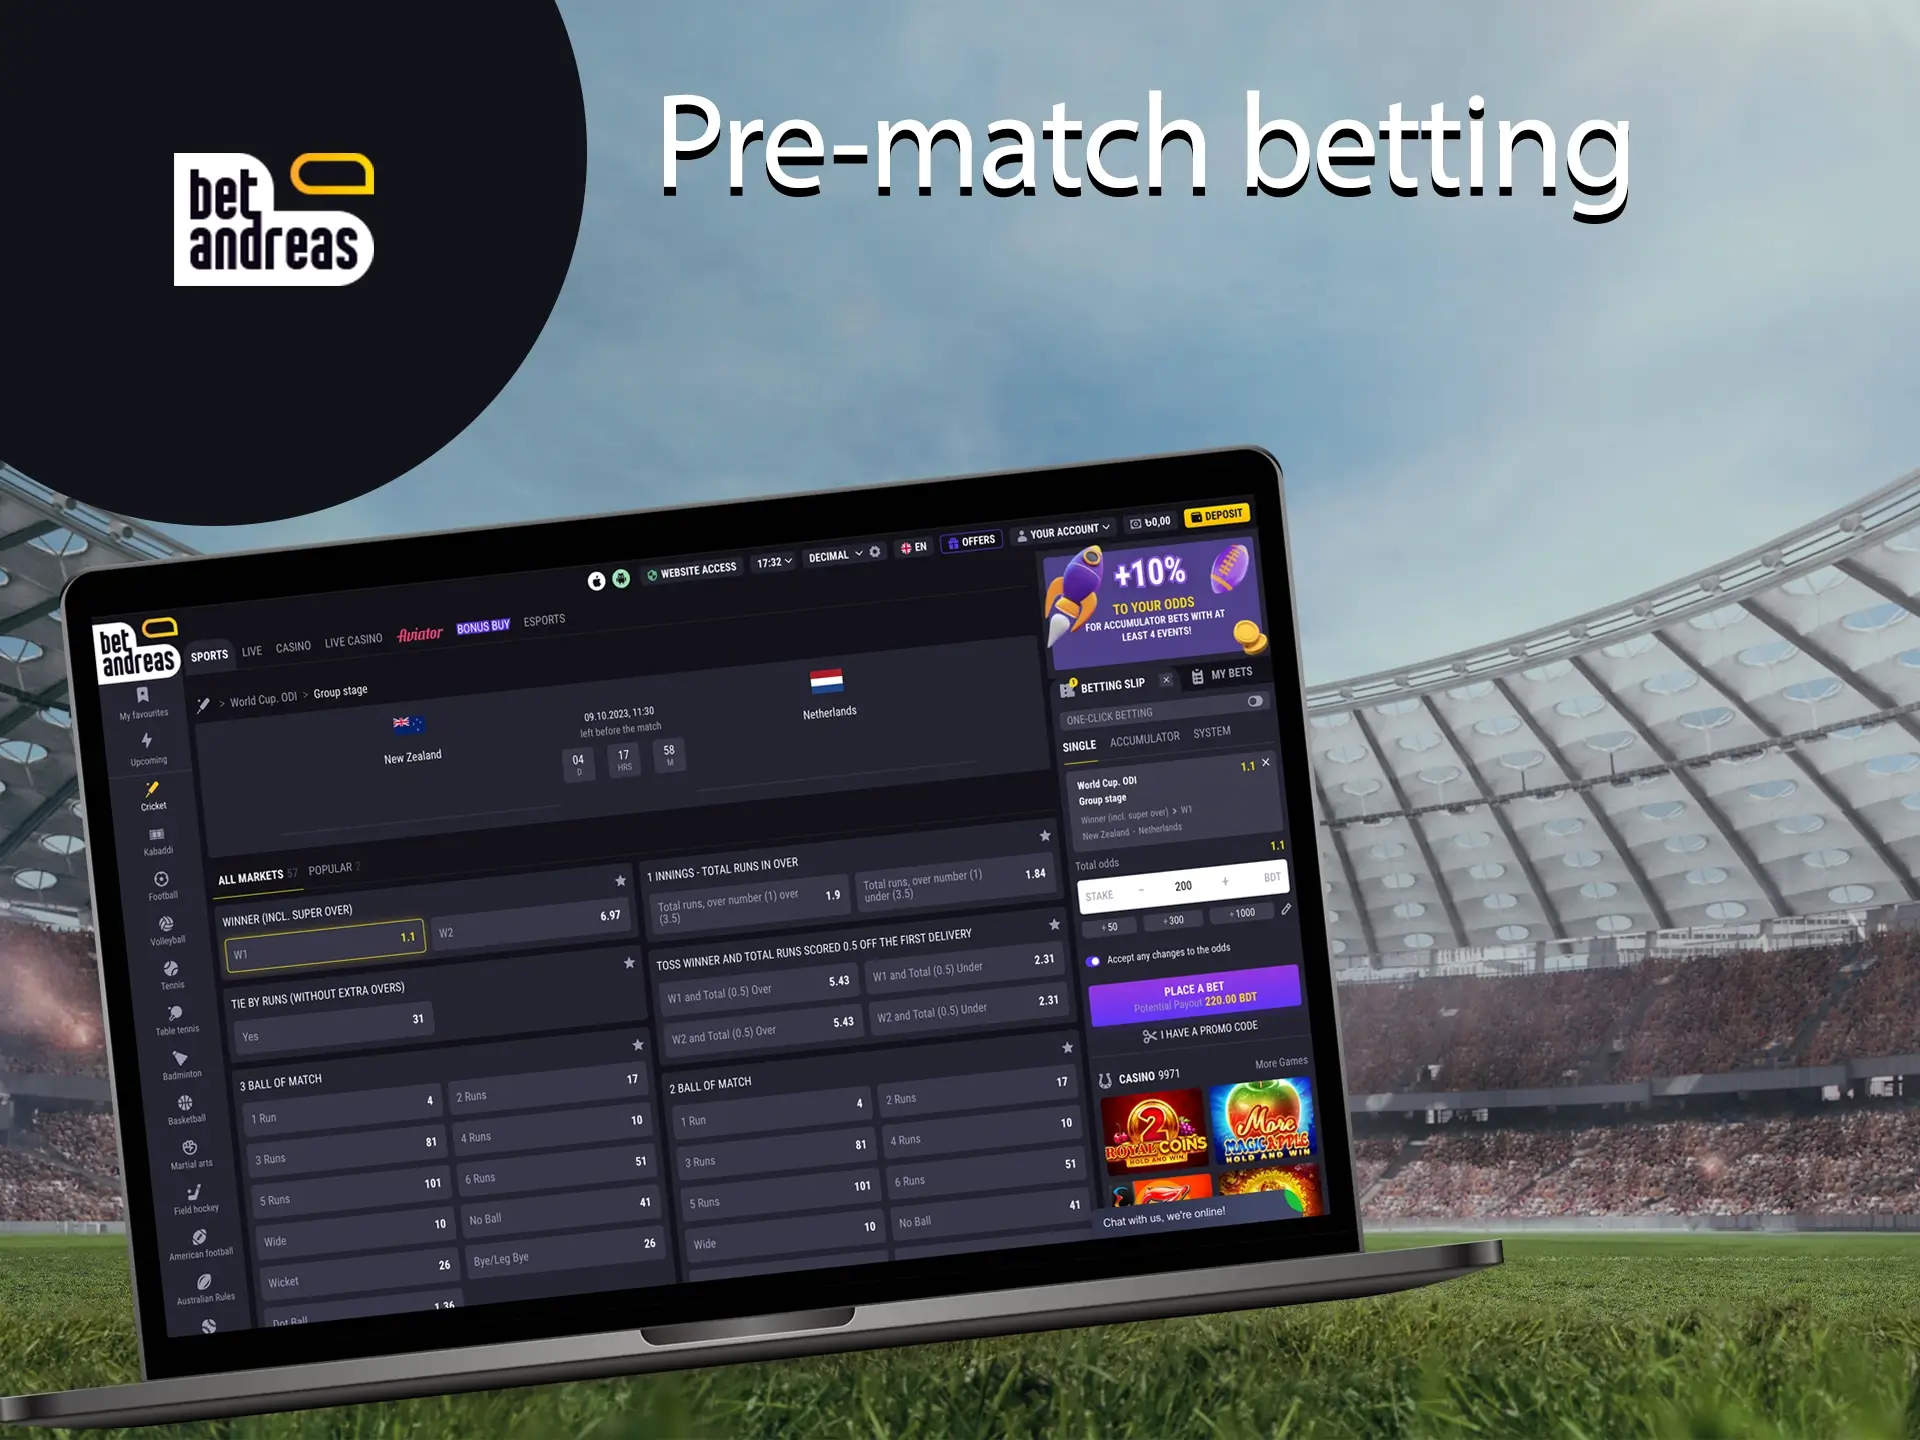 Bet on your favourites or underdogs before the match and make a real profit.